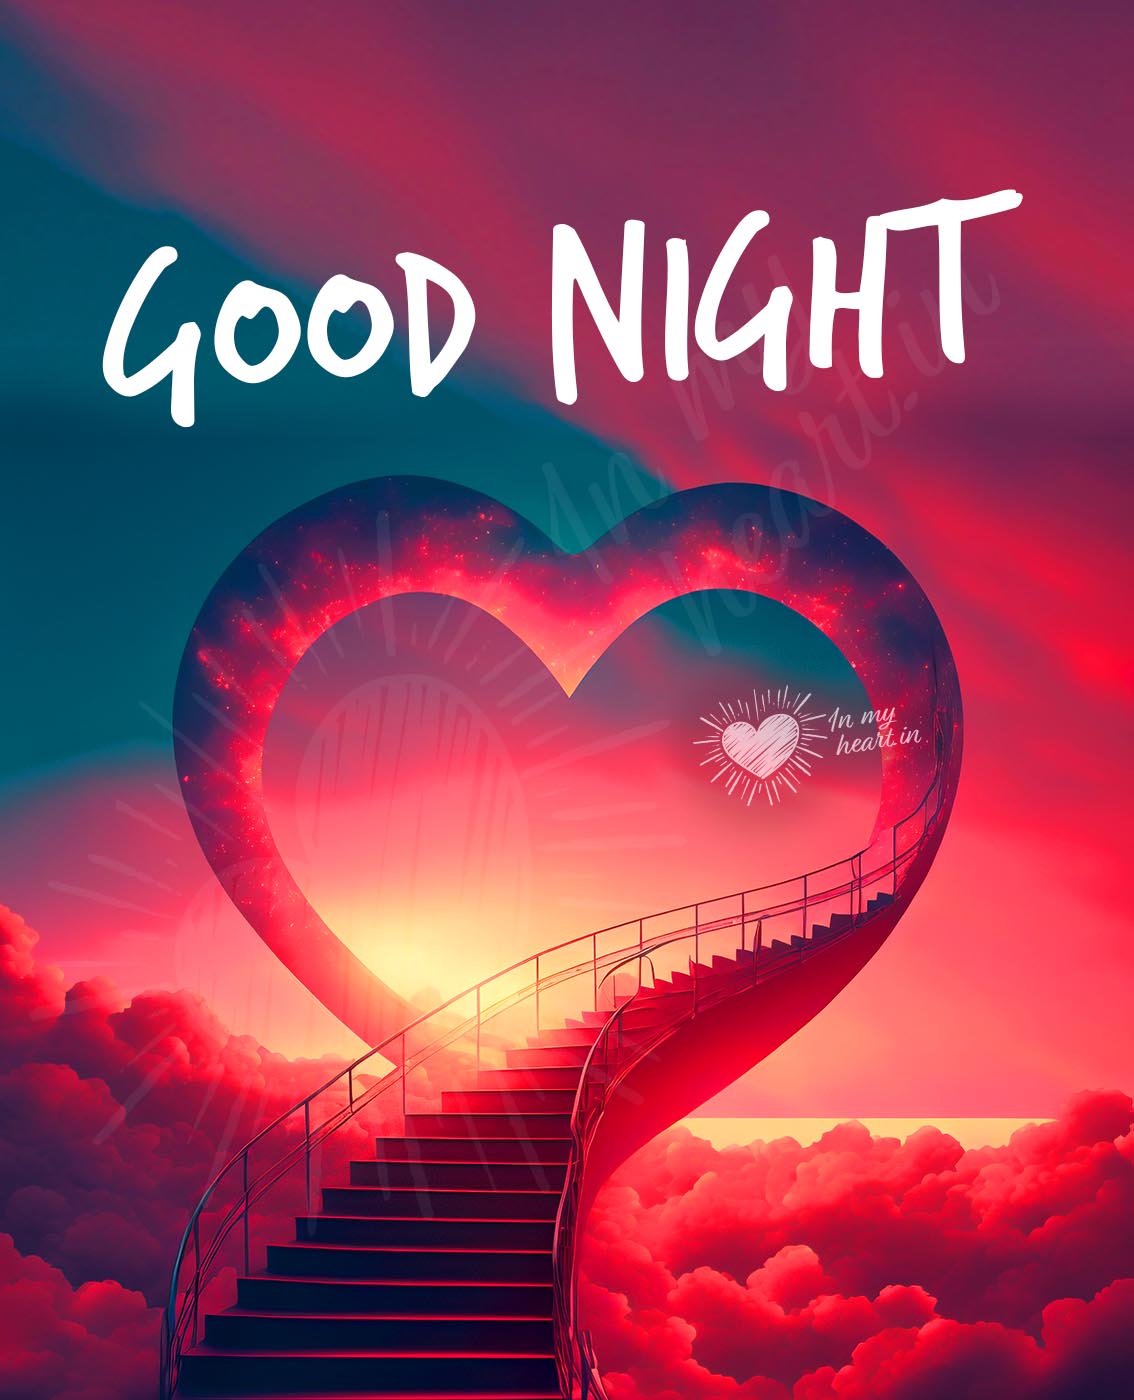 Good Night My Love Gif Download Over 999 Beautiful Good Night Heart Images - Incredible Collection  in Full 4K Resolution